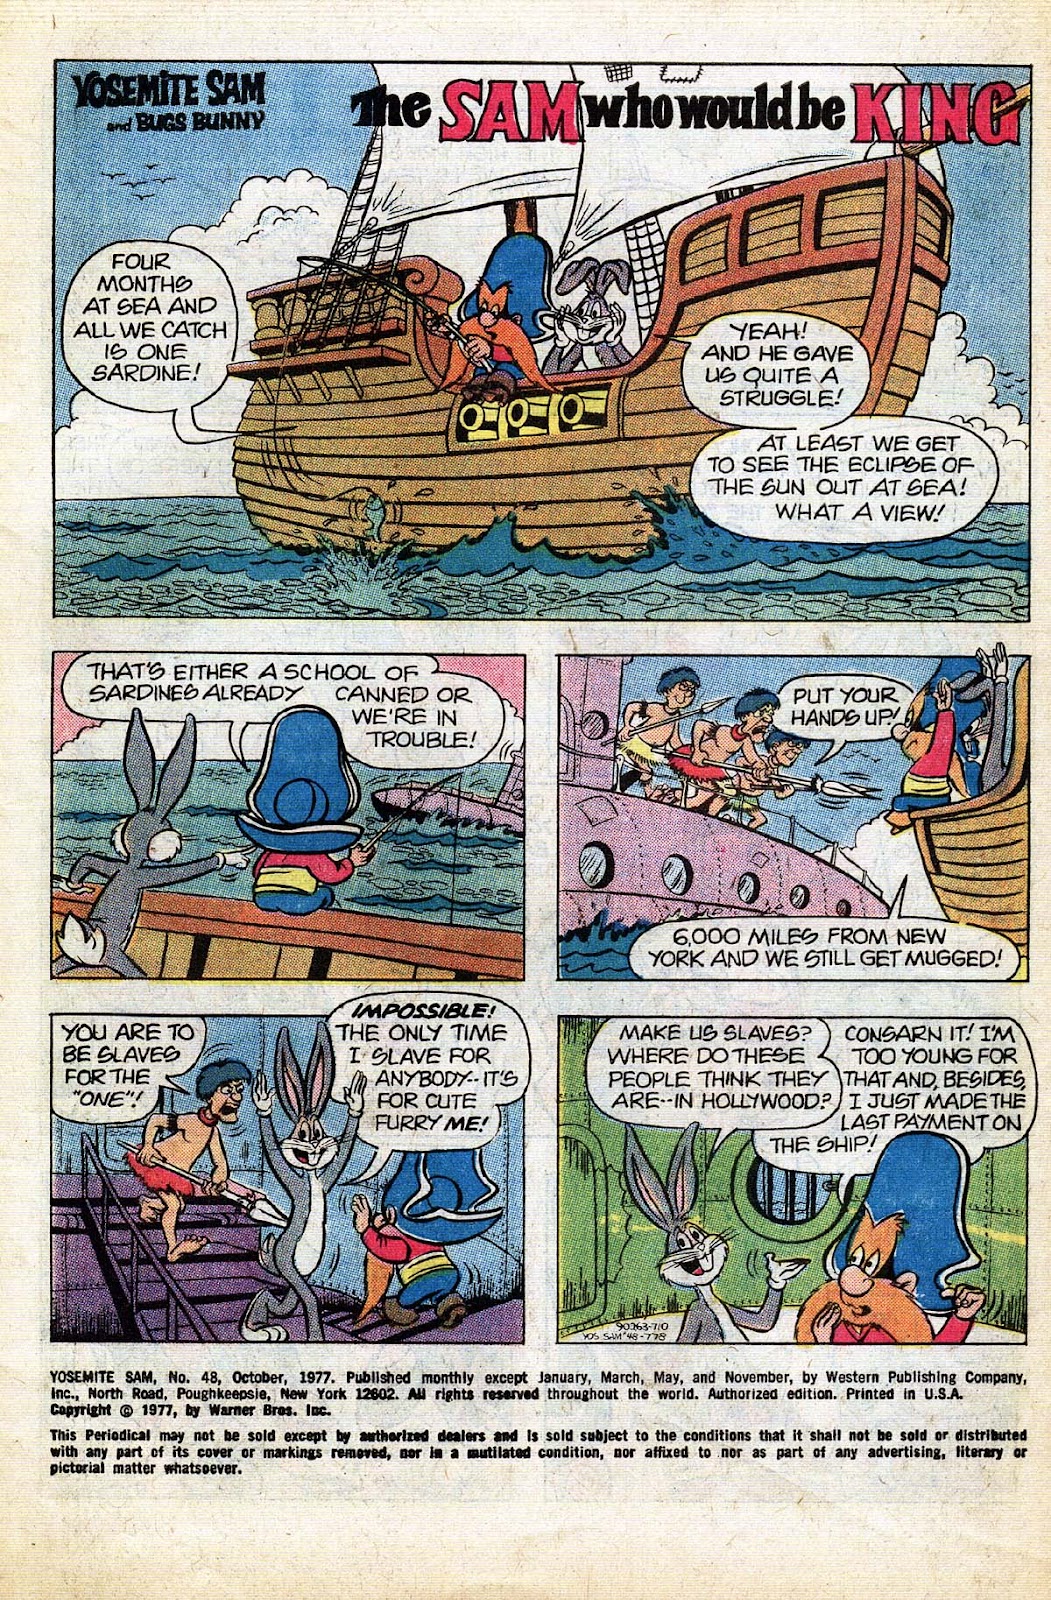 Yosemite Sam and Bugs Bunny issue 48 - Page 3